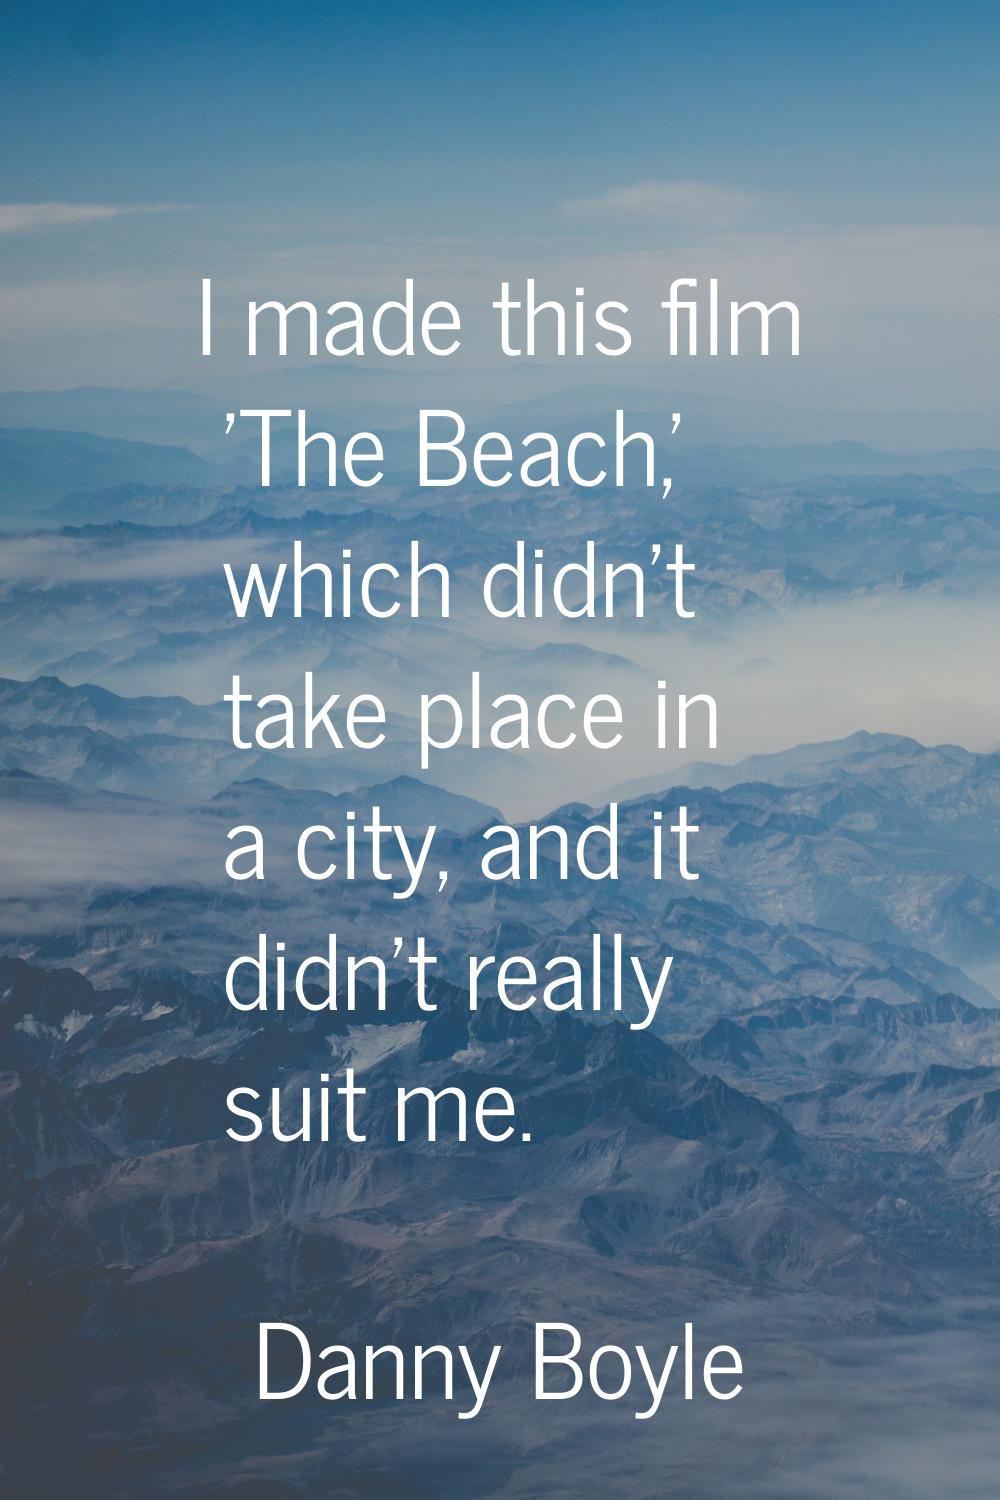 I made this film 'The Beach,' which didn't take place in a city, and it didn't really suit me.